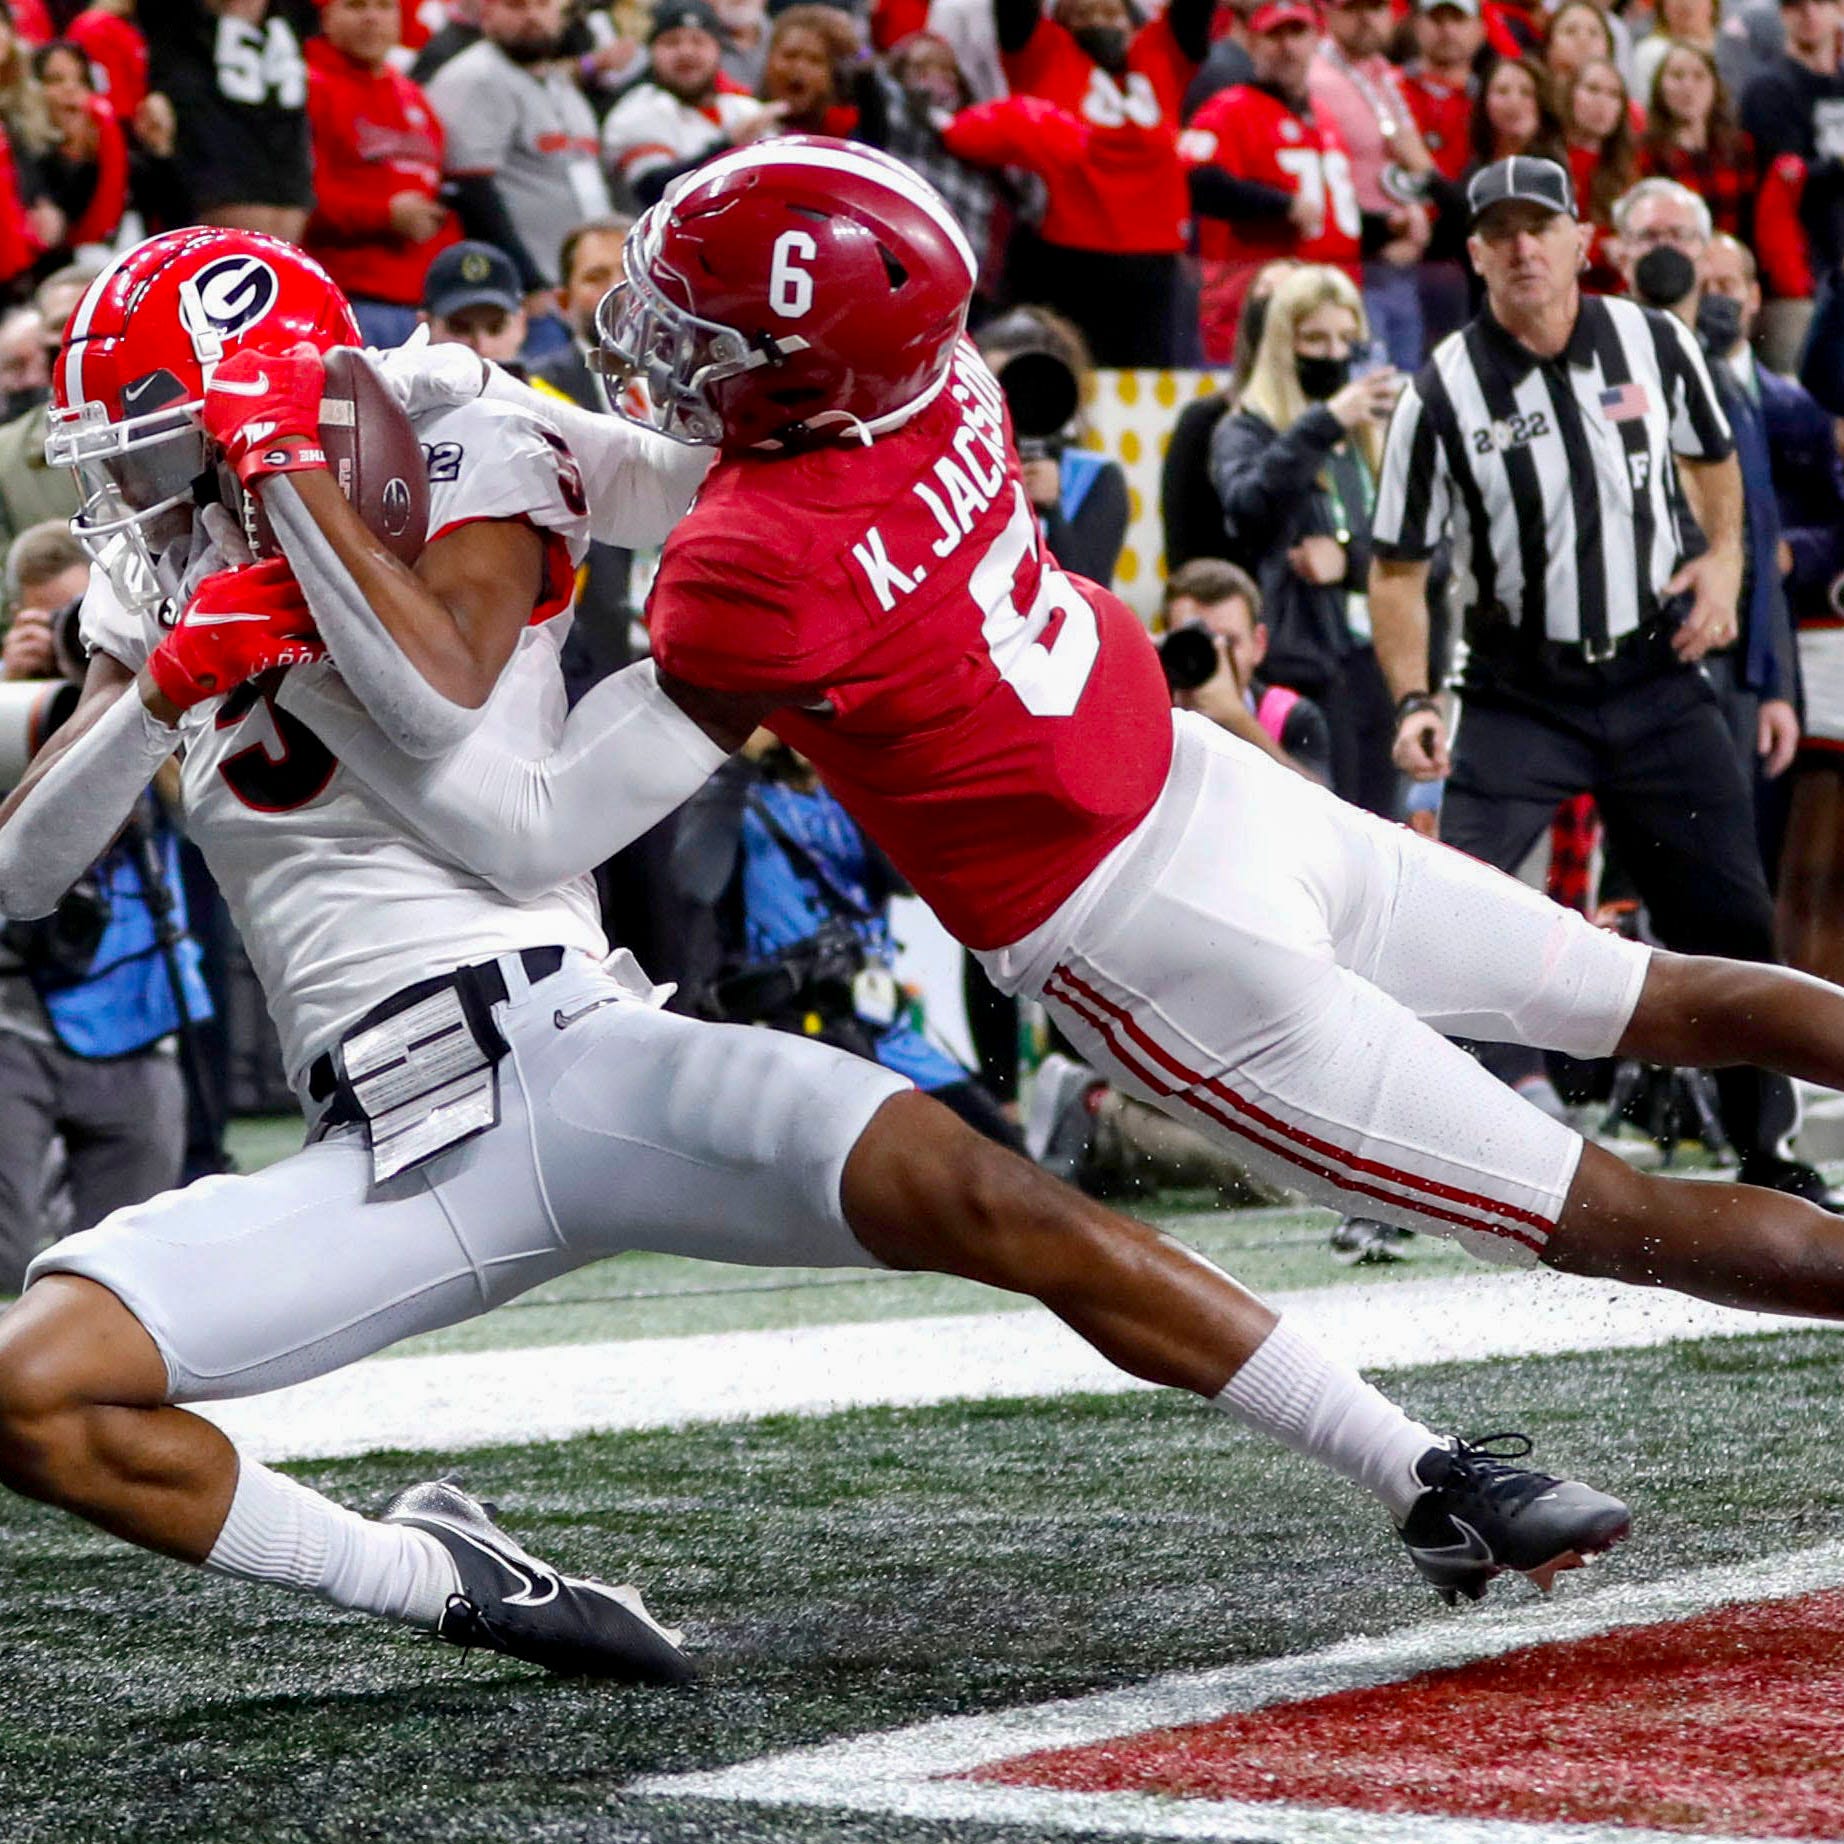 January 10, 2022: Indianapolis, IN, USA; Georgia Bulldogs wide receiver Adonai Mitchell (5) catches a touchdown pass while being guarded by Alabama Crimson Tide defensive back Khyree Jackson (6) during the College Football Playoff National Championship at Lucas Oil Stadium in Indianapolis.